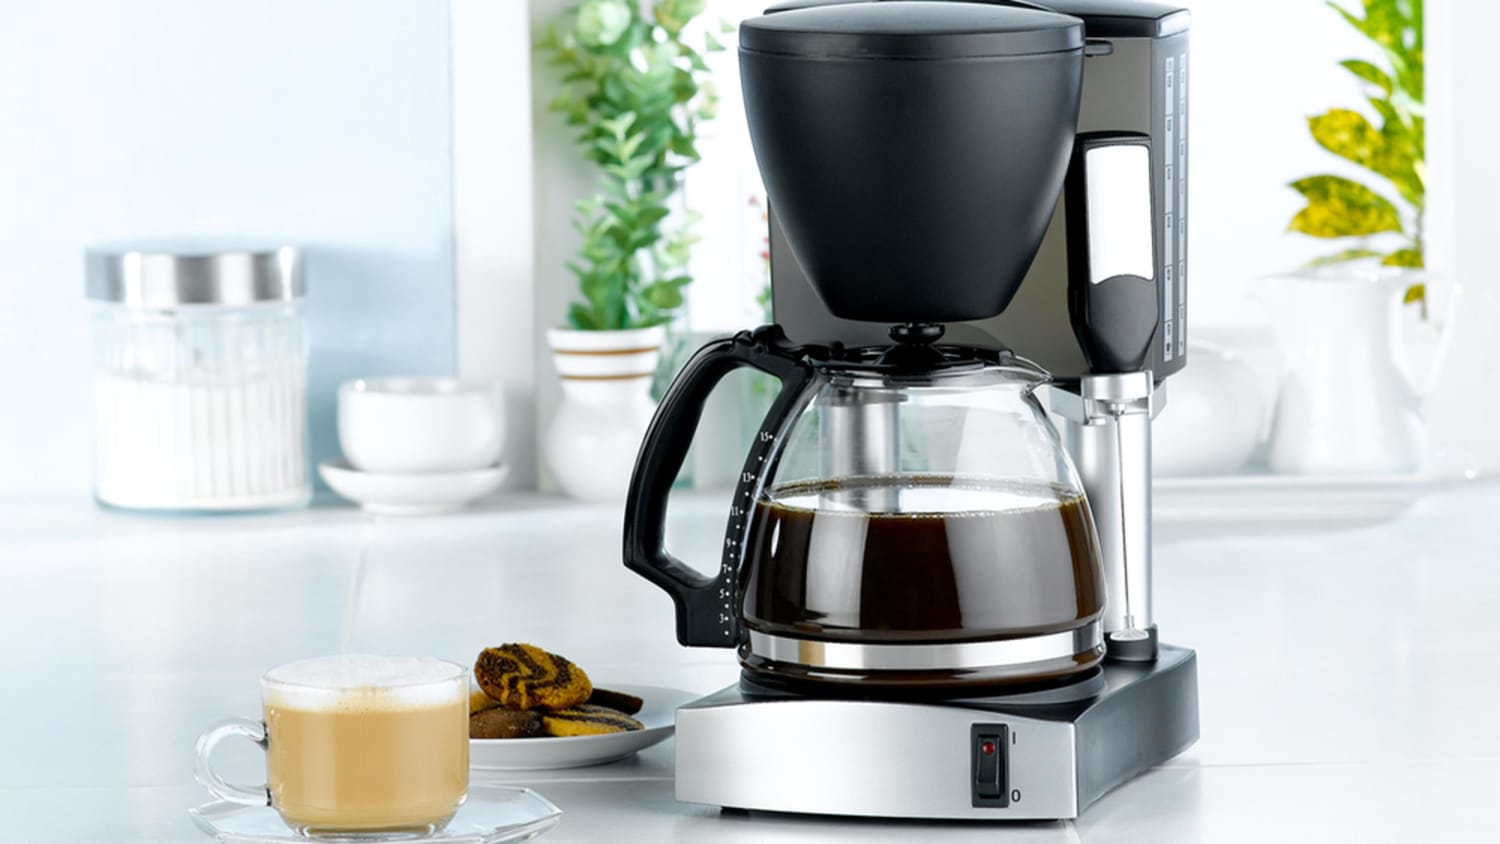 How to clean a coffee maker